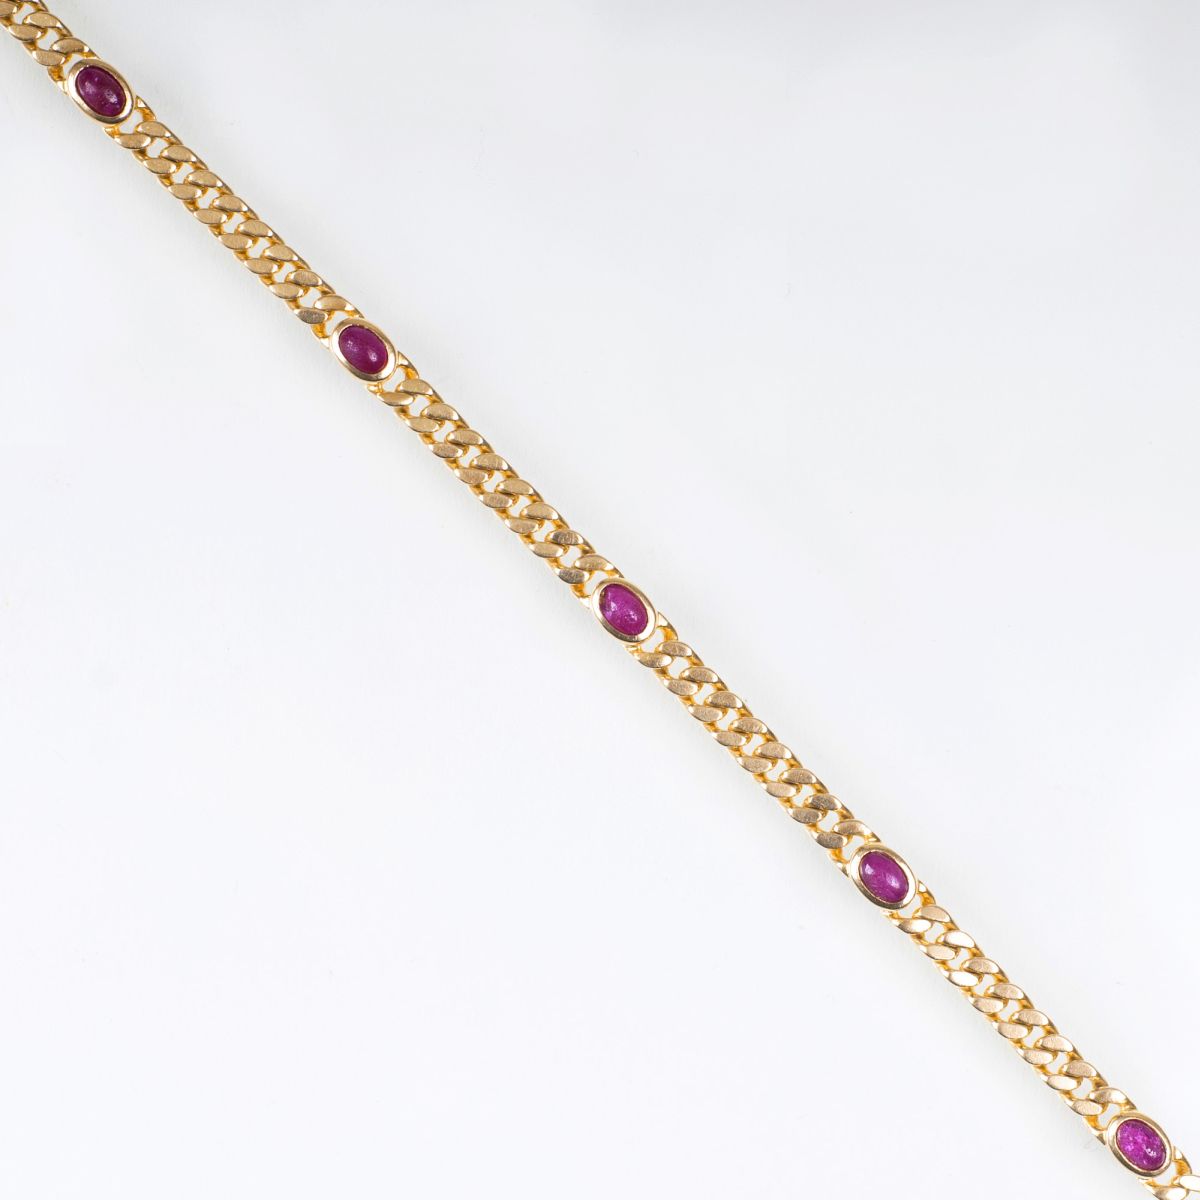 A Gold Bracelet with Rubies